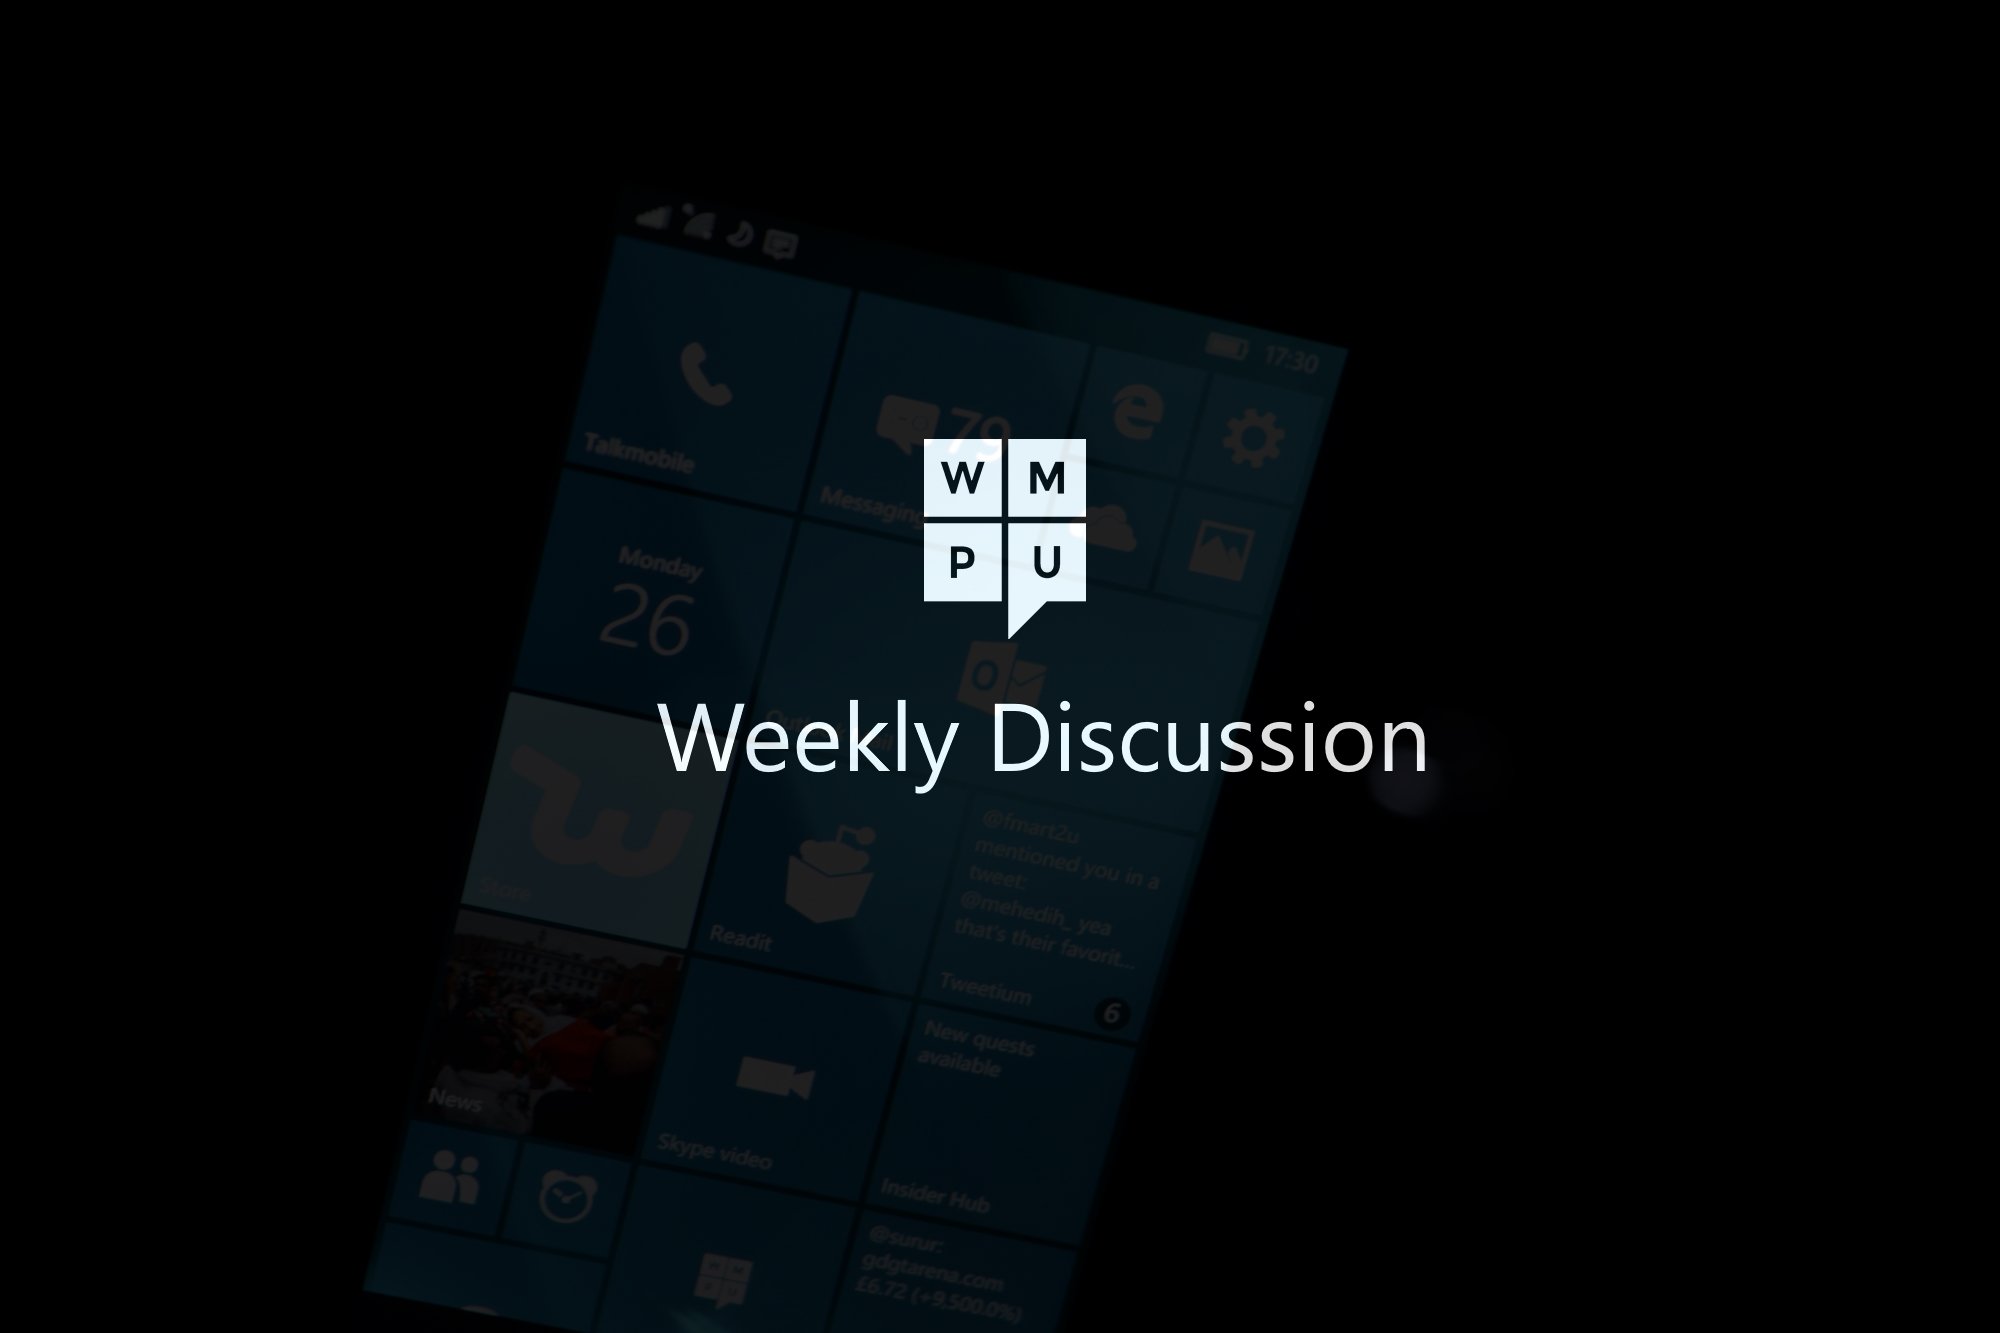 Weekly discussion: Microsoft’s smart new Lumia Strategy, Build 10581, Continuity and the future of smartphones